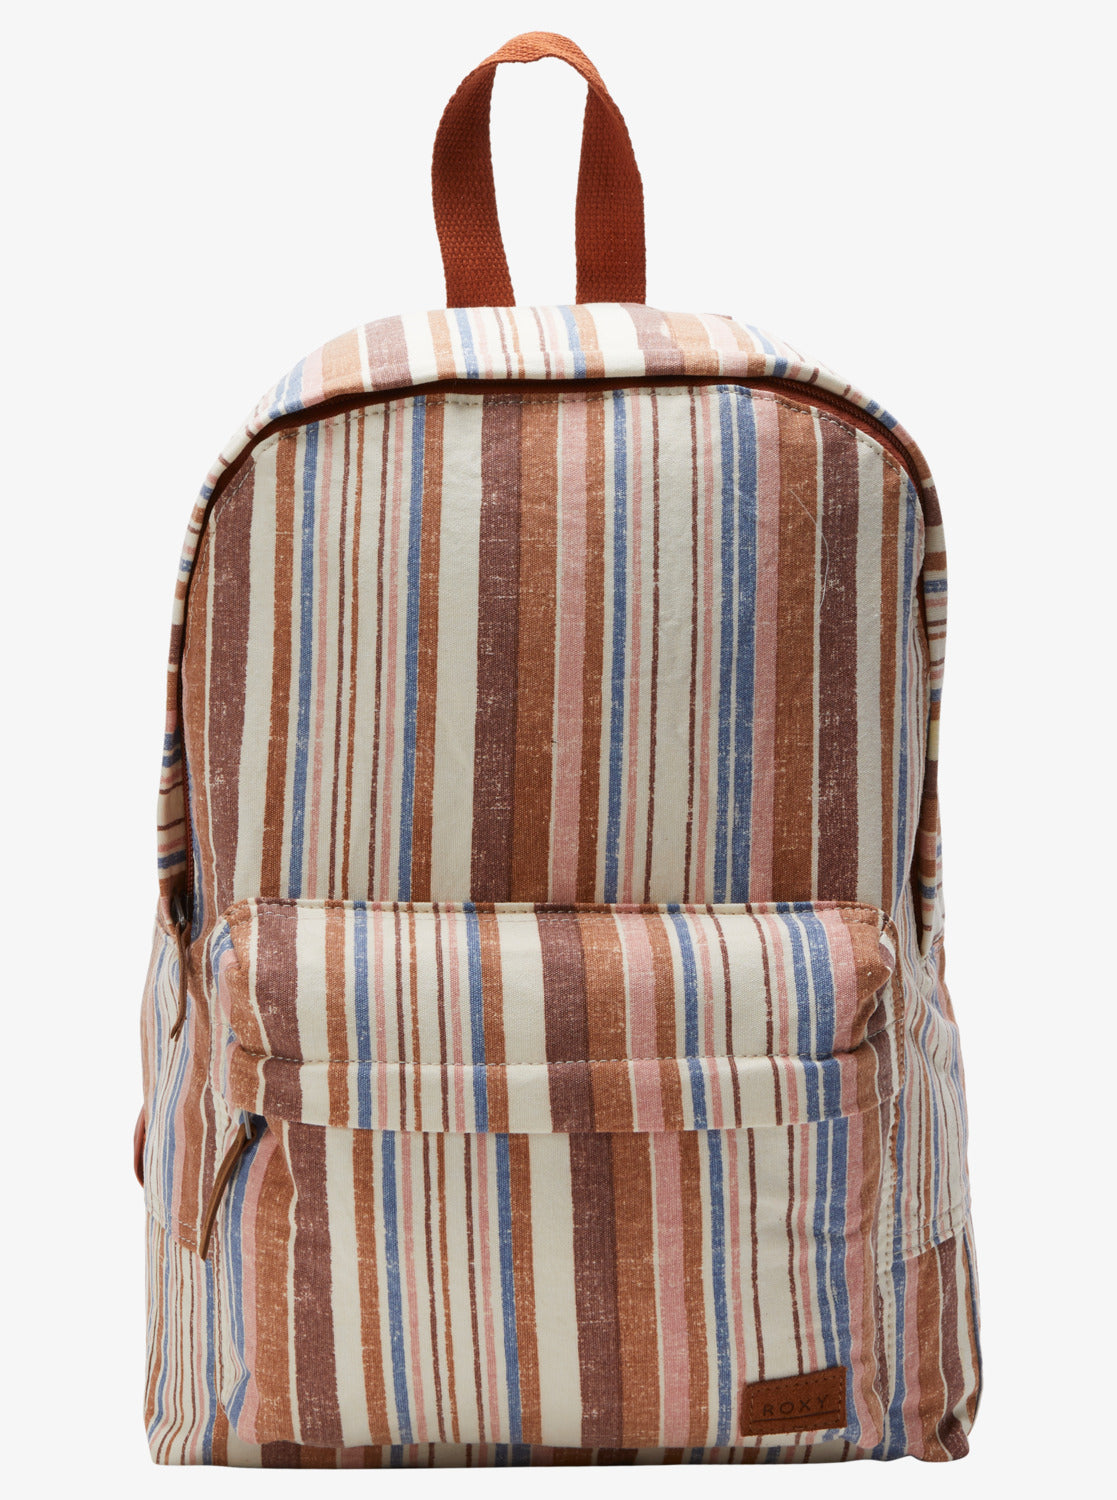 BACKPACK STRIPED SUGAR BABY